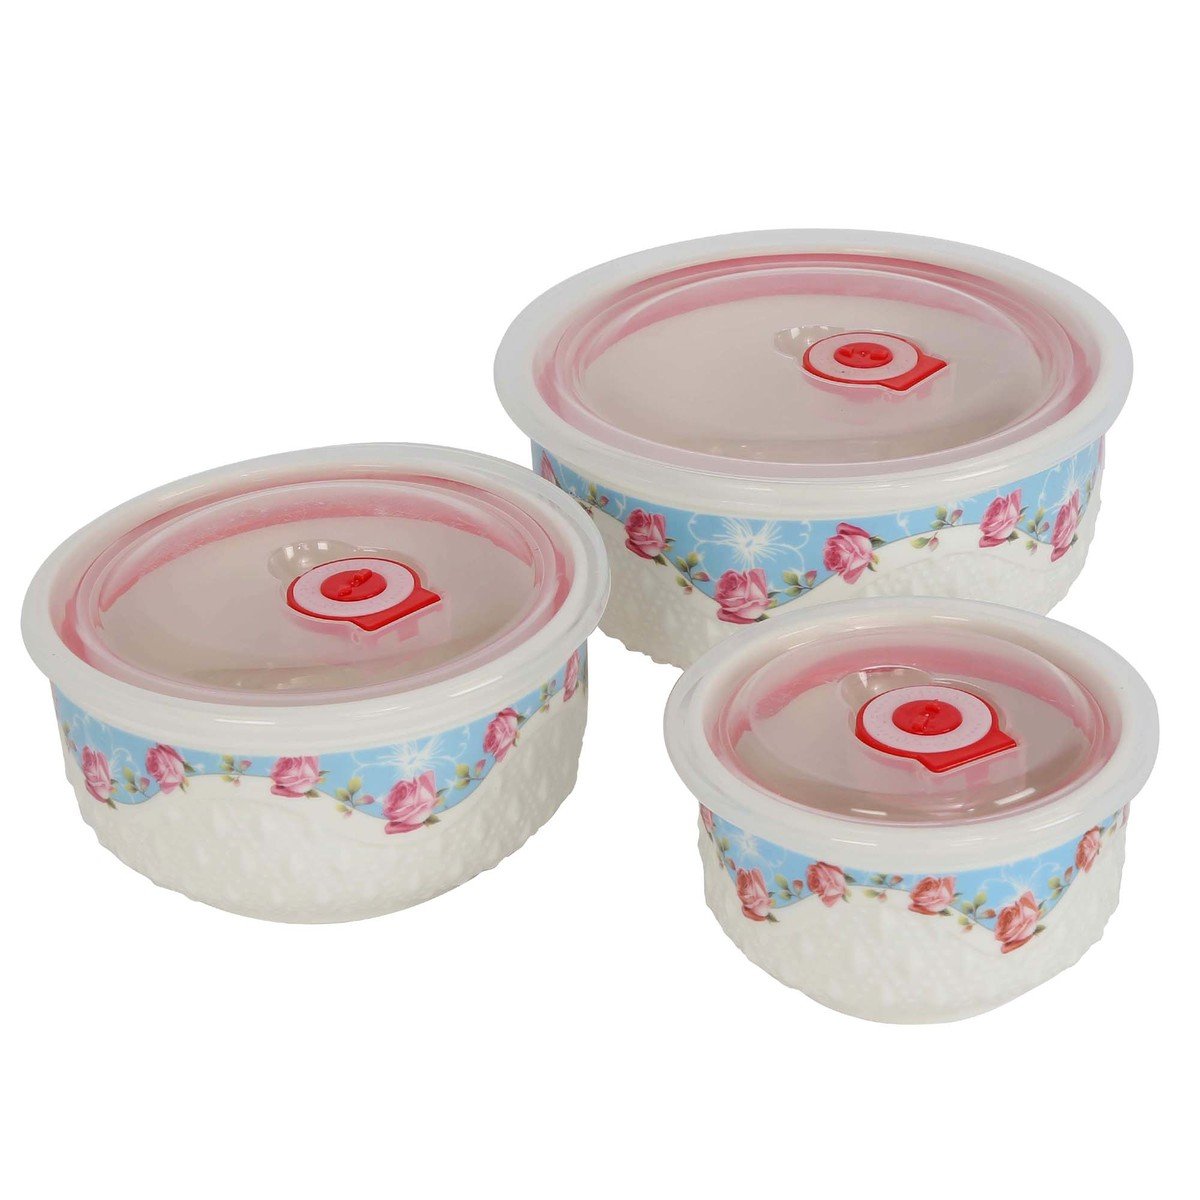 Daira Opalware Bowl Set with lid 3pcs Assorted Colors